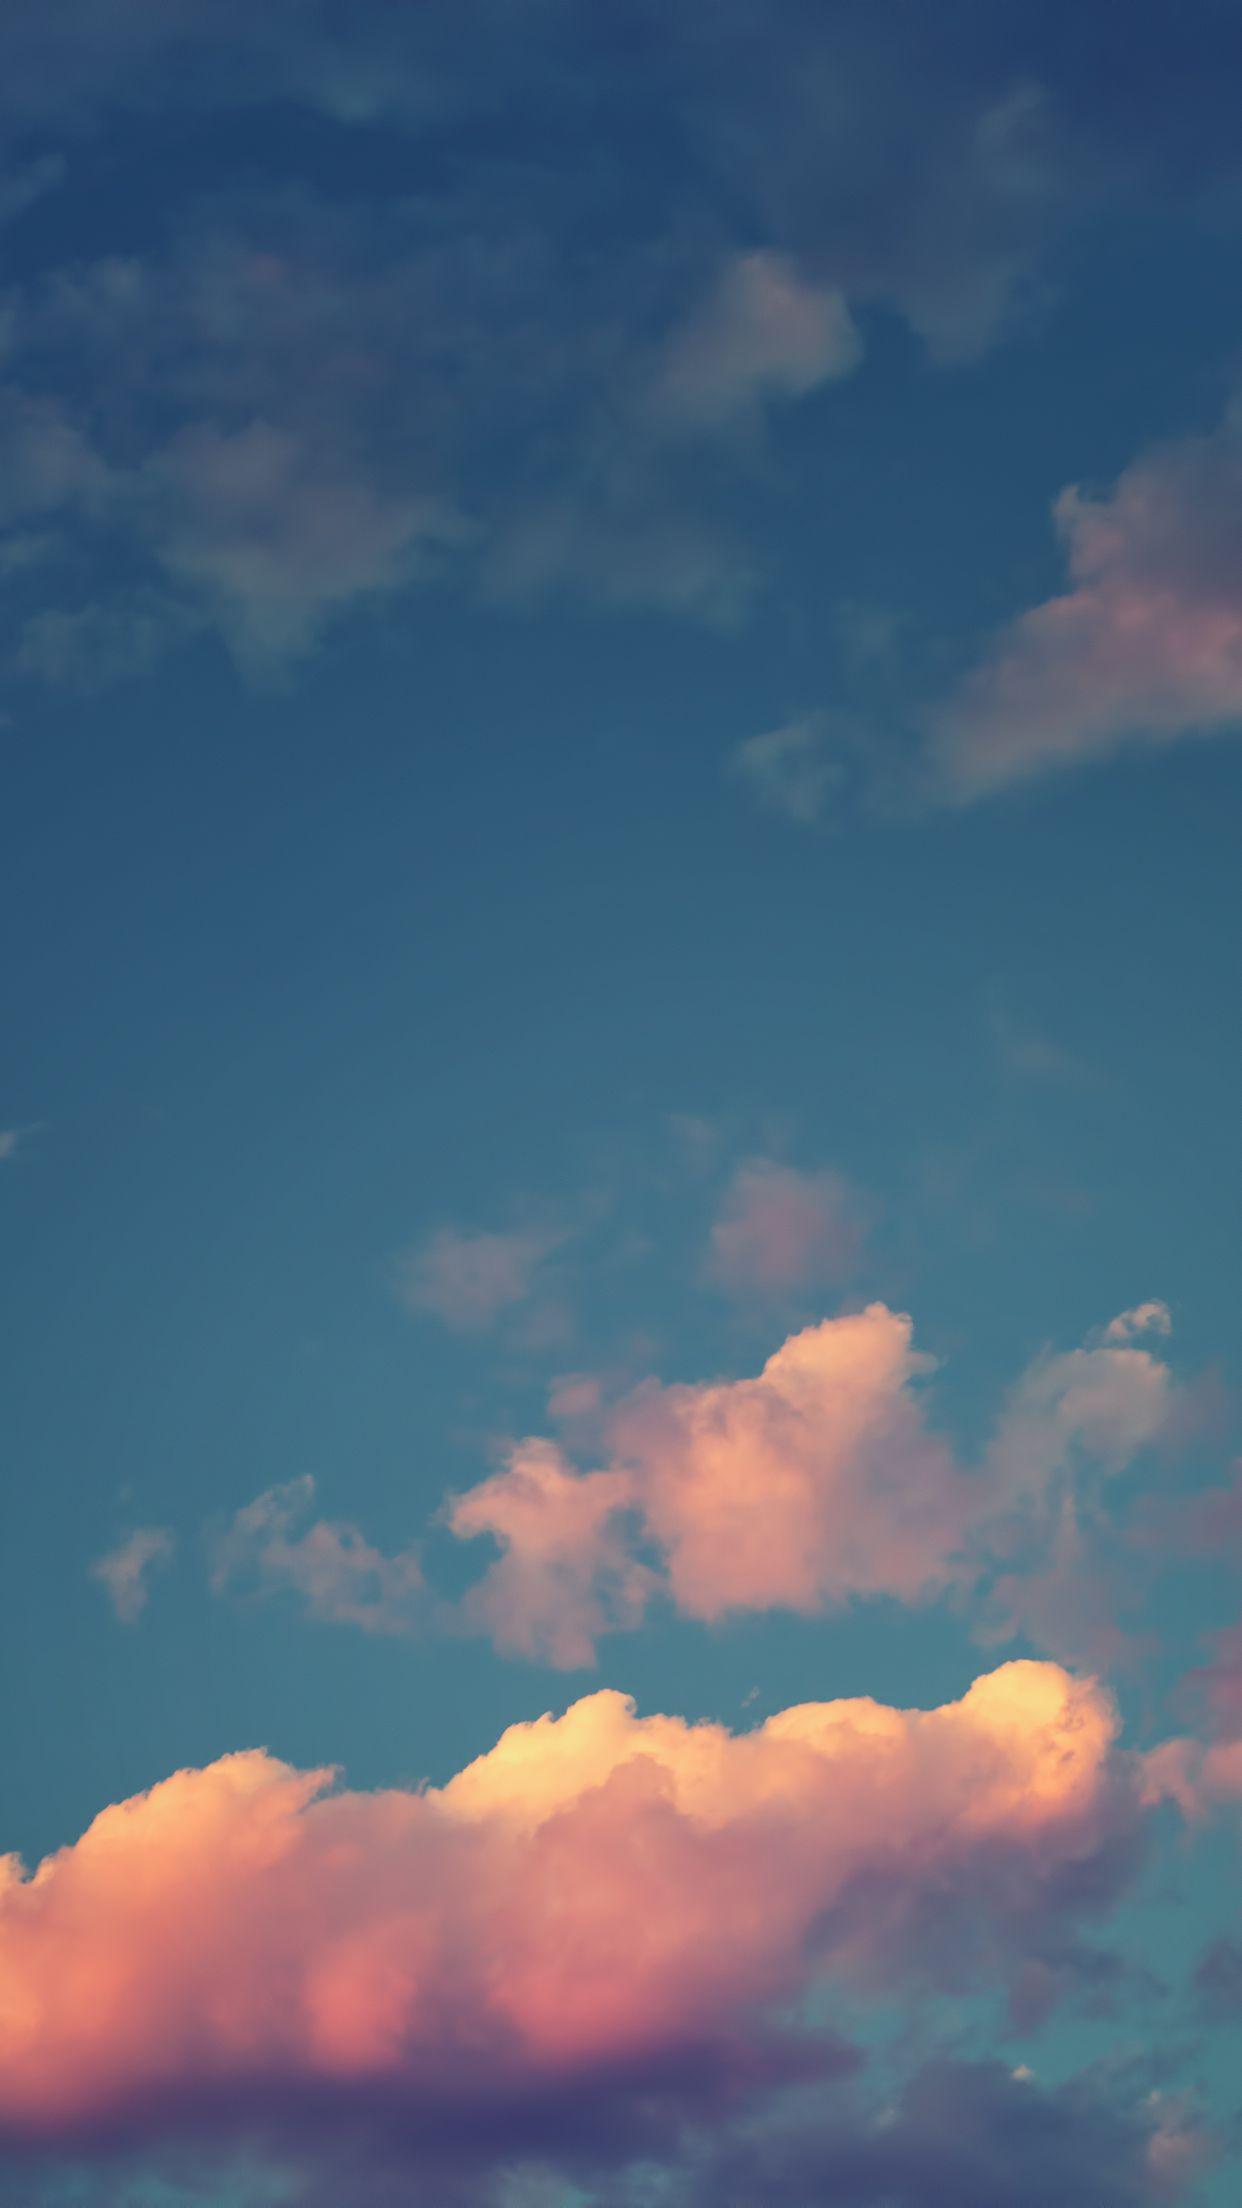 Sunset and clouds wallpaper for iPhone 6 and iPhone 6 Plus